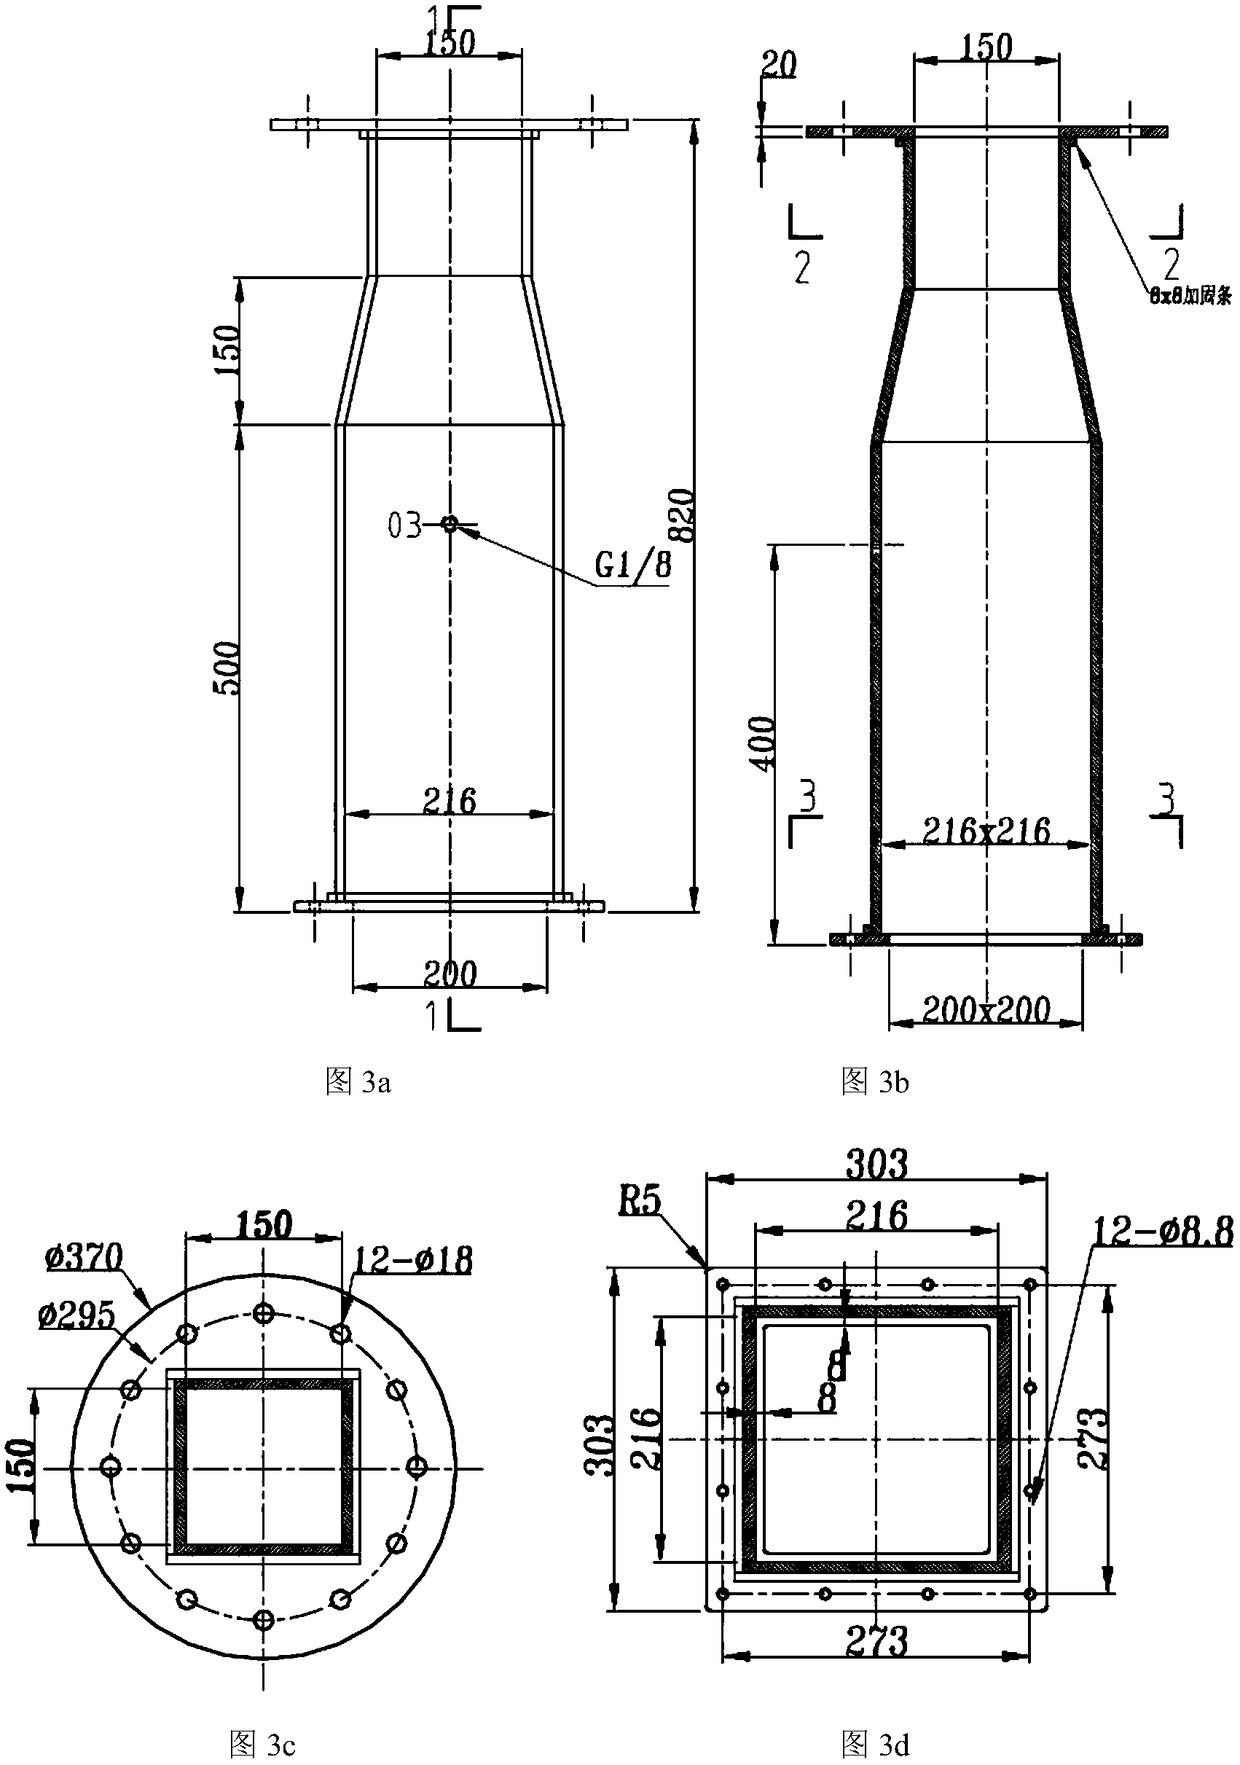 Hydroscour test system and test method for lower tube seat of nuclear reactor fuel assembly